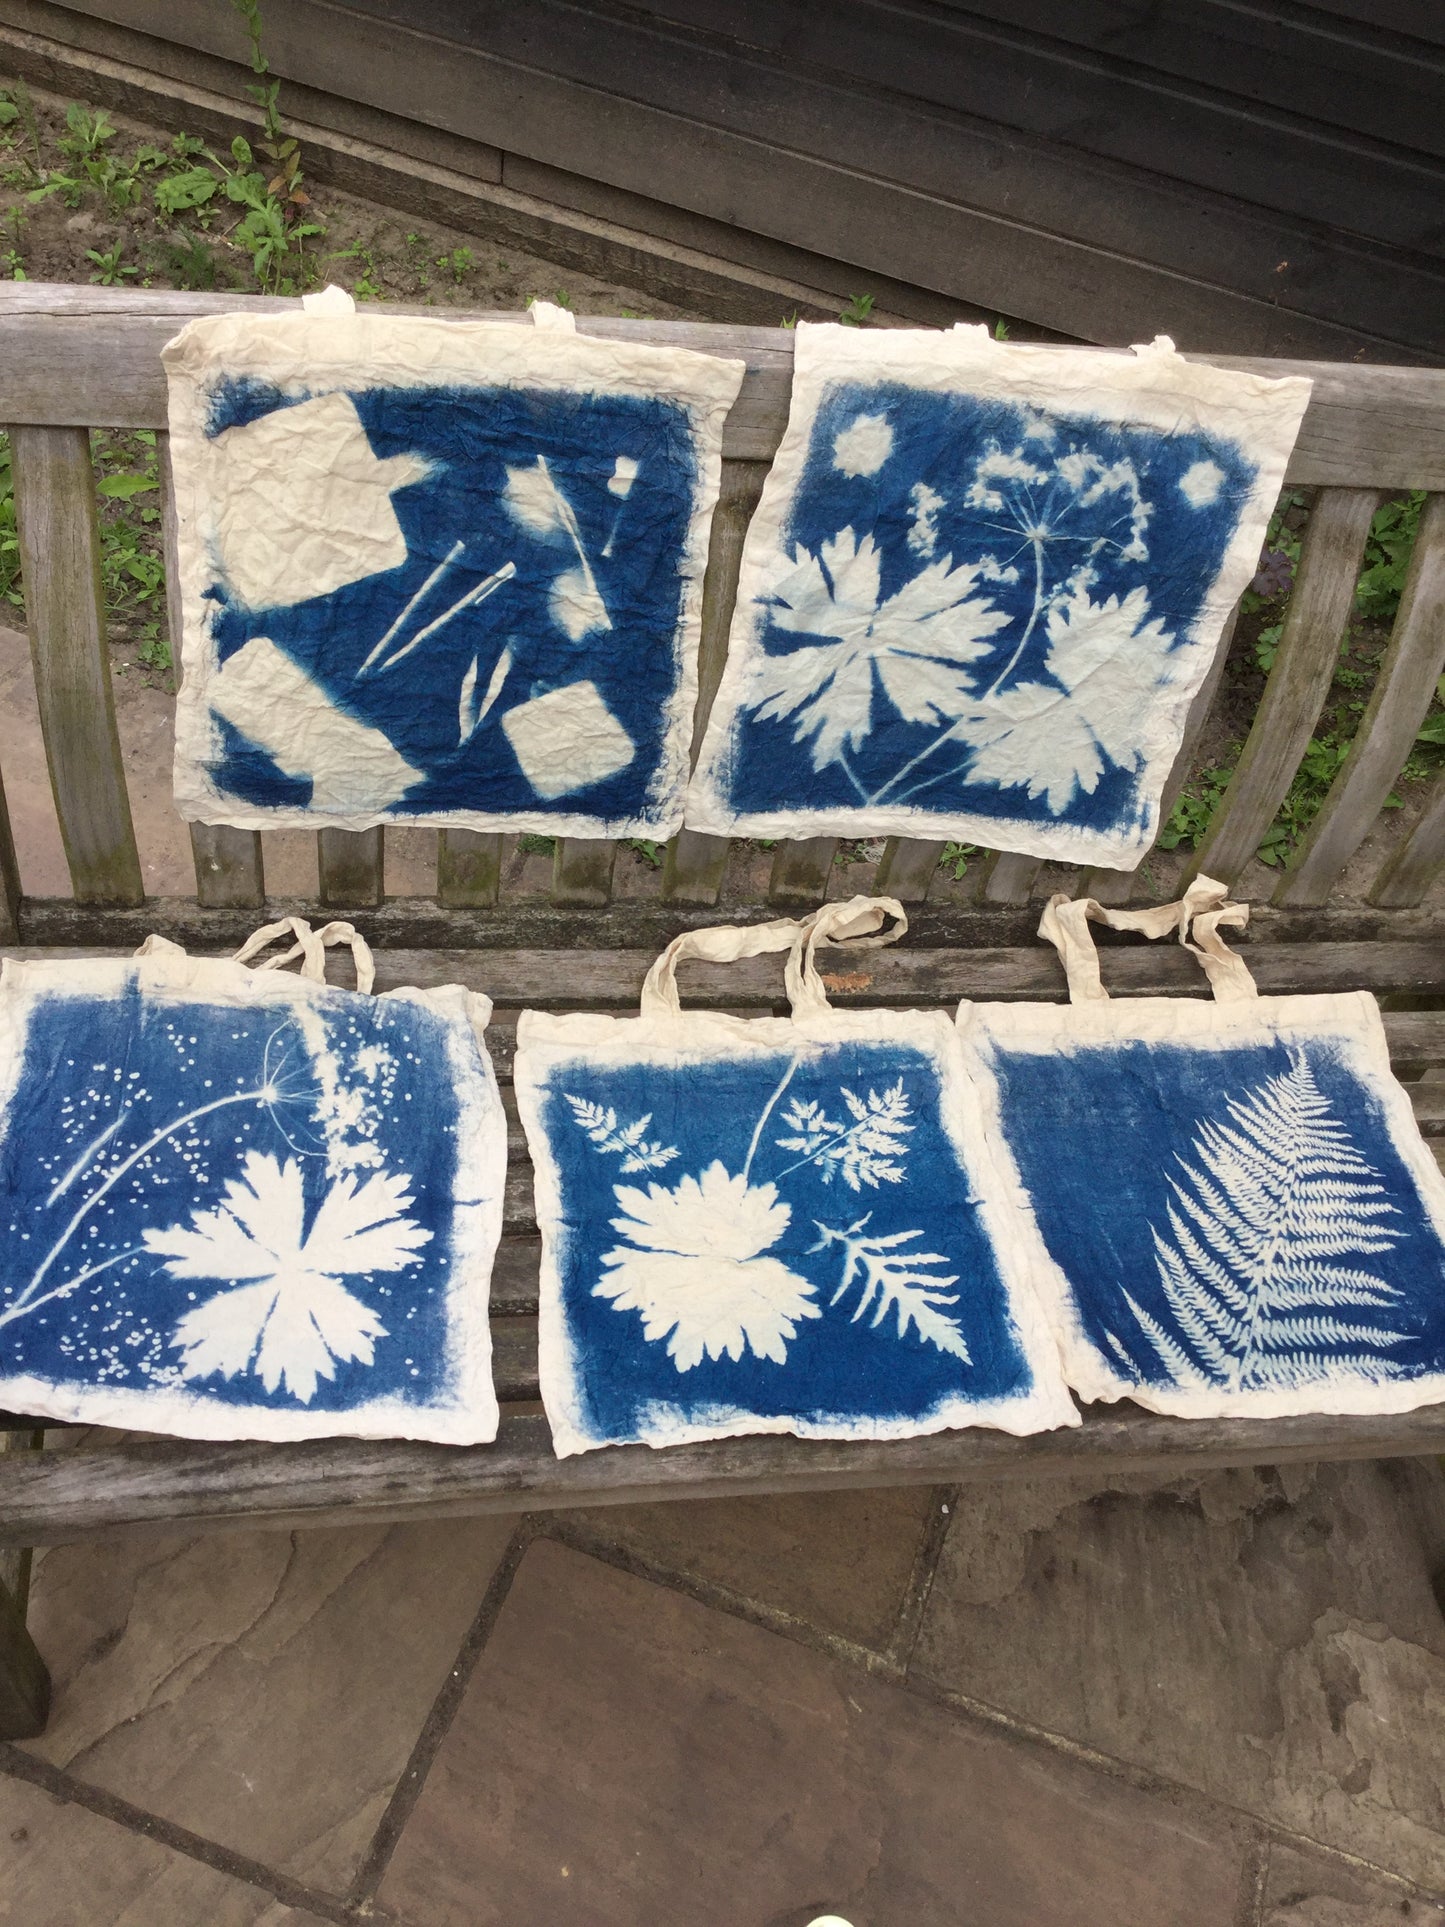 "Making Photographs without a Camera" - Cyanotype Workshop in Porto, Portugal